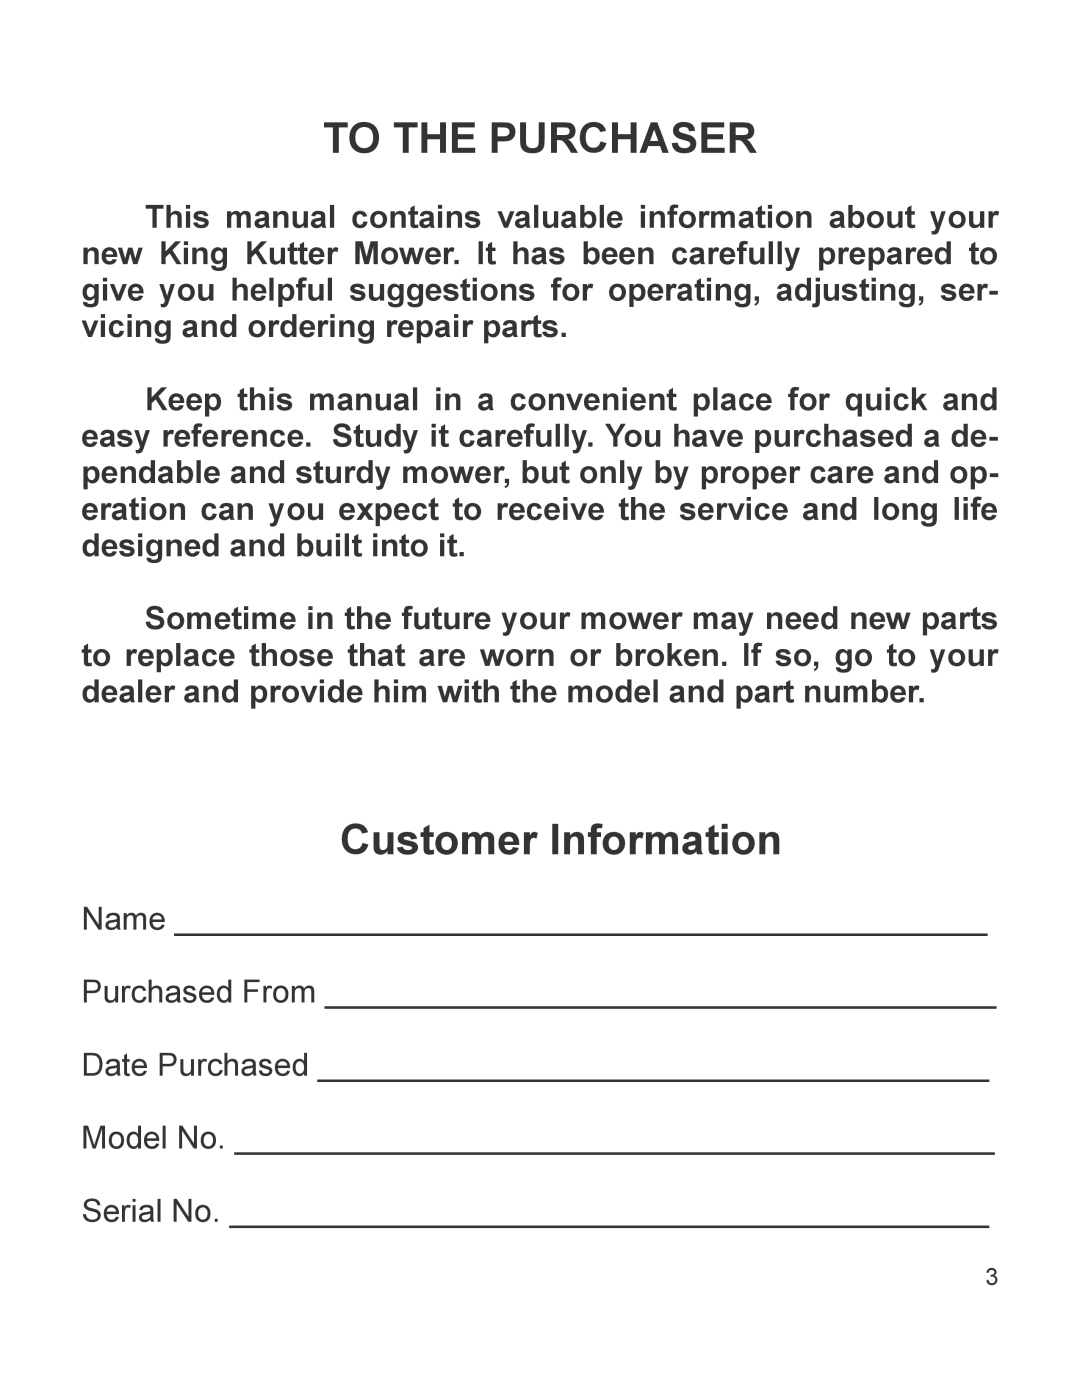 King Kutter 999996 manual To The Purchaser, Customer Information 